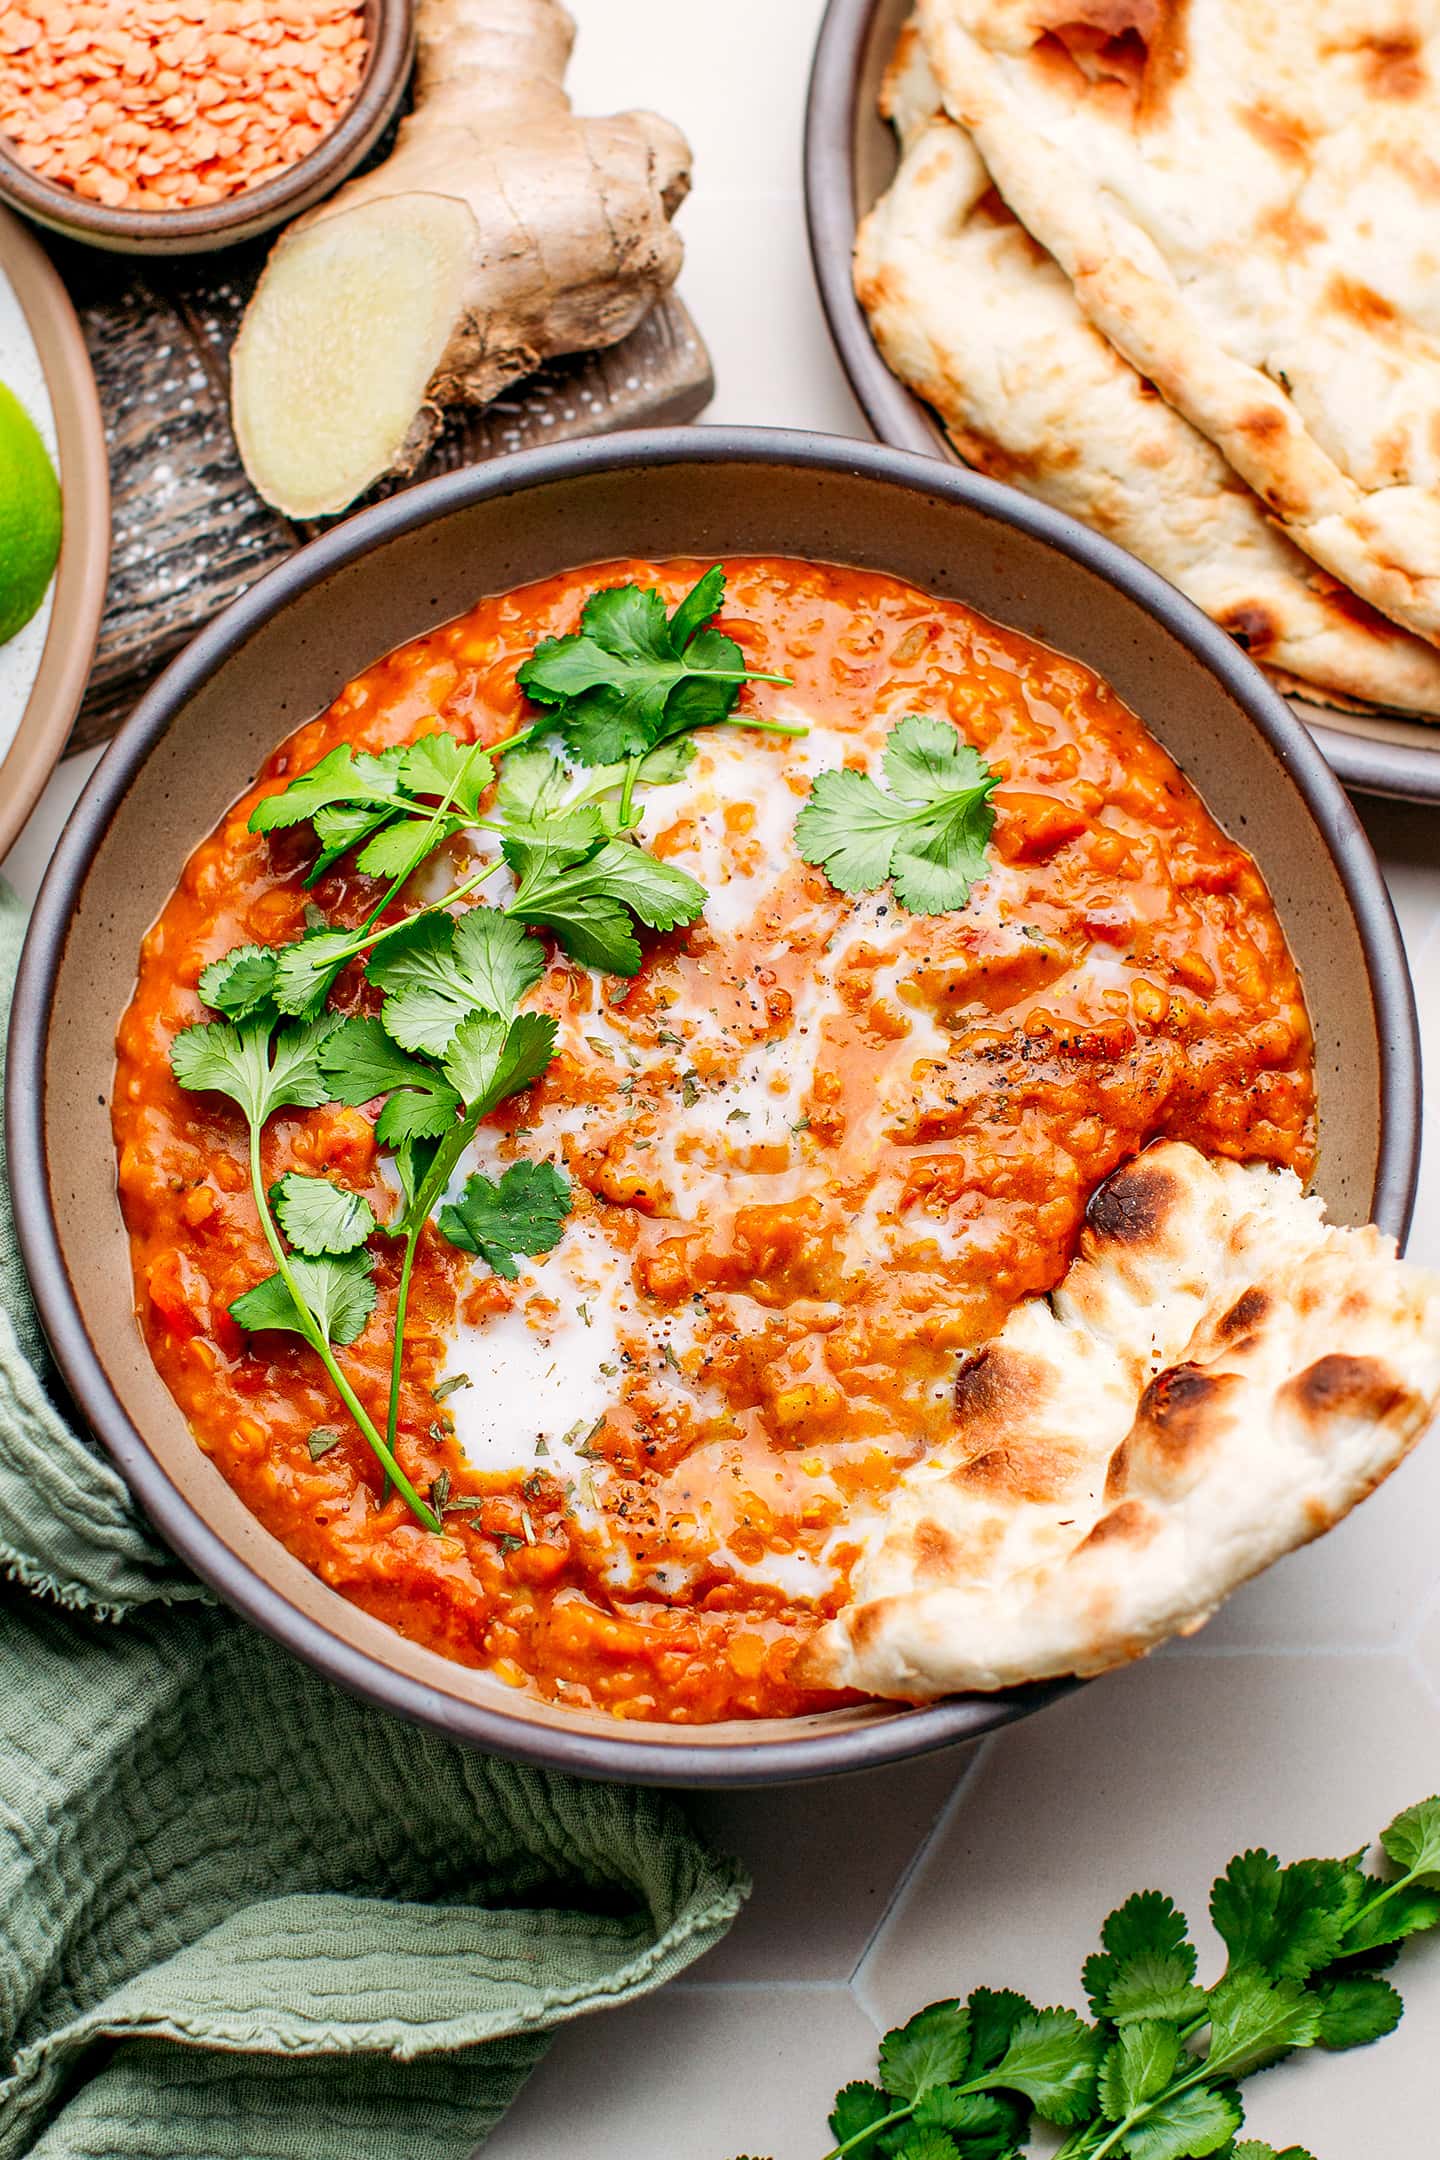 Red lentil curry in a bowl with cilantro, coconut milk, and naan.